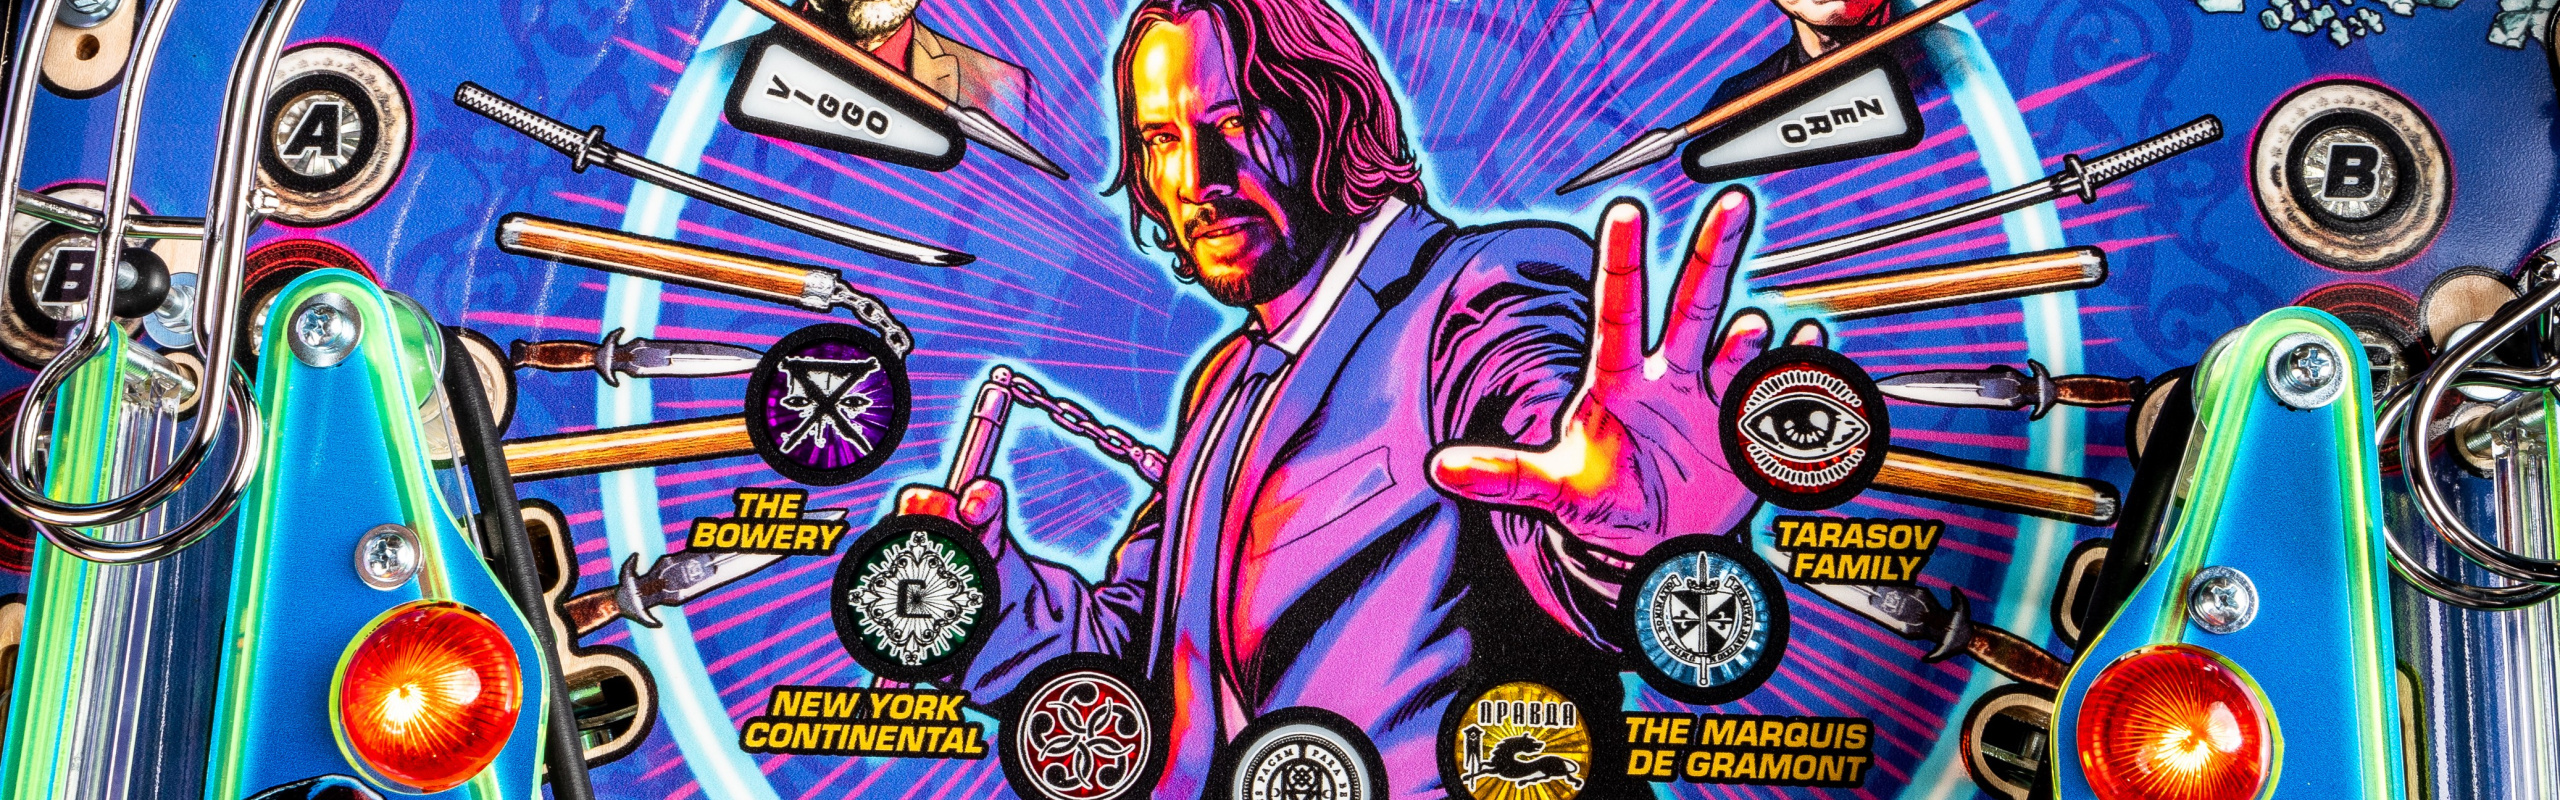 Lionsgate and Stern Pinball’s New John Wick Pinball Games Ready to Infiltrate Homes and Arcades Worldwide